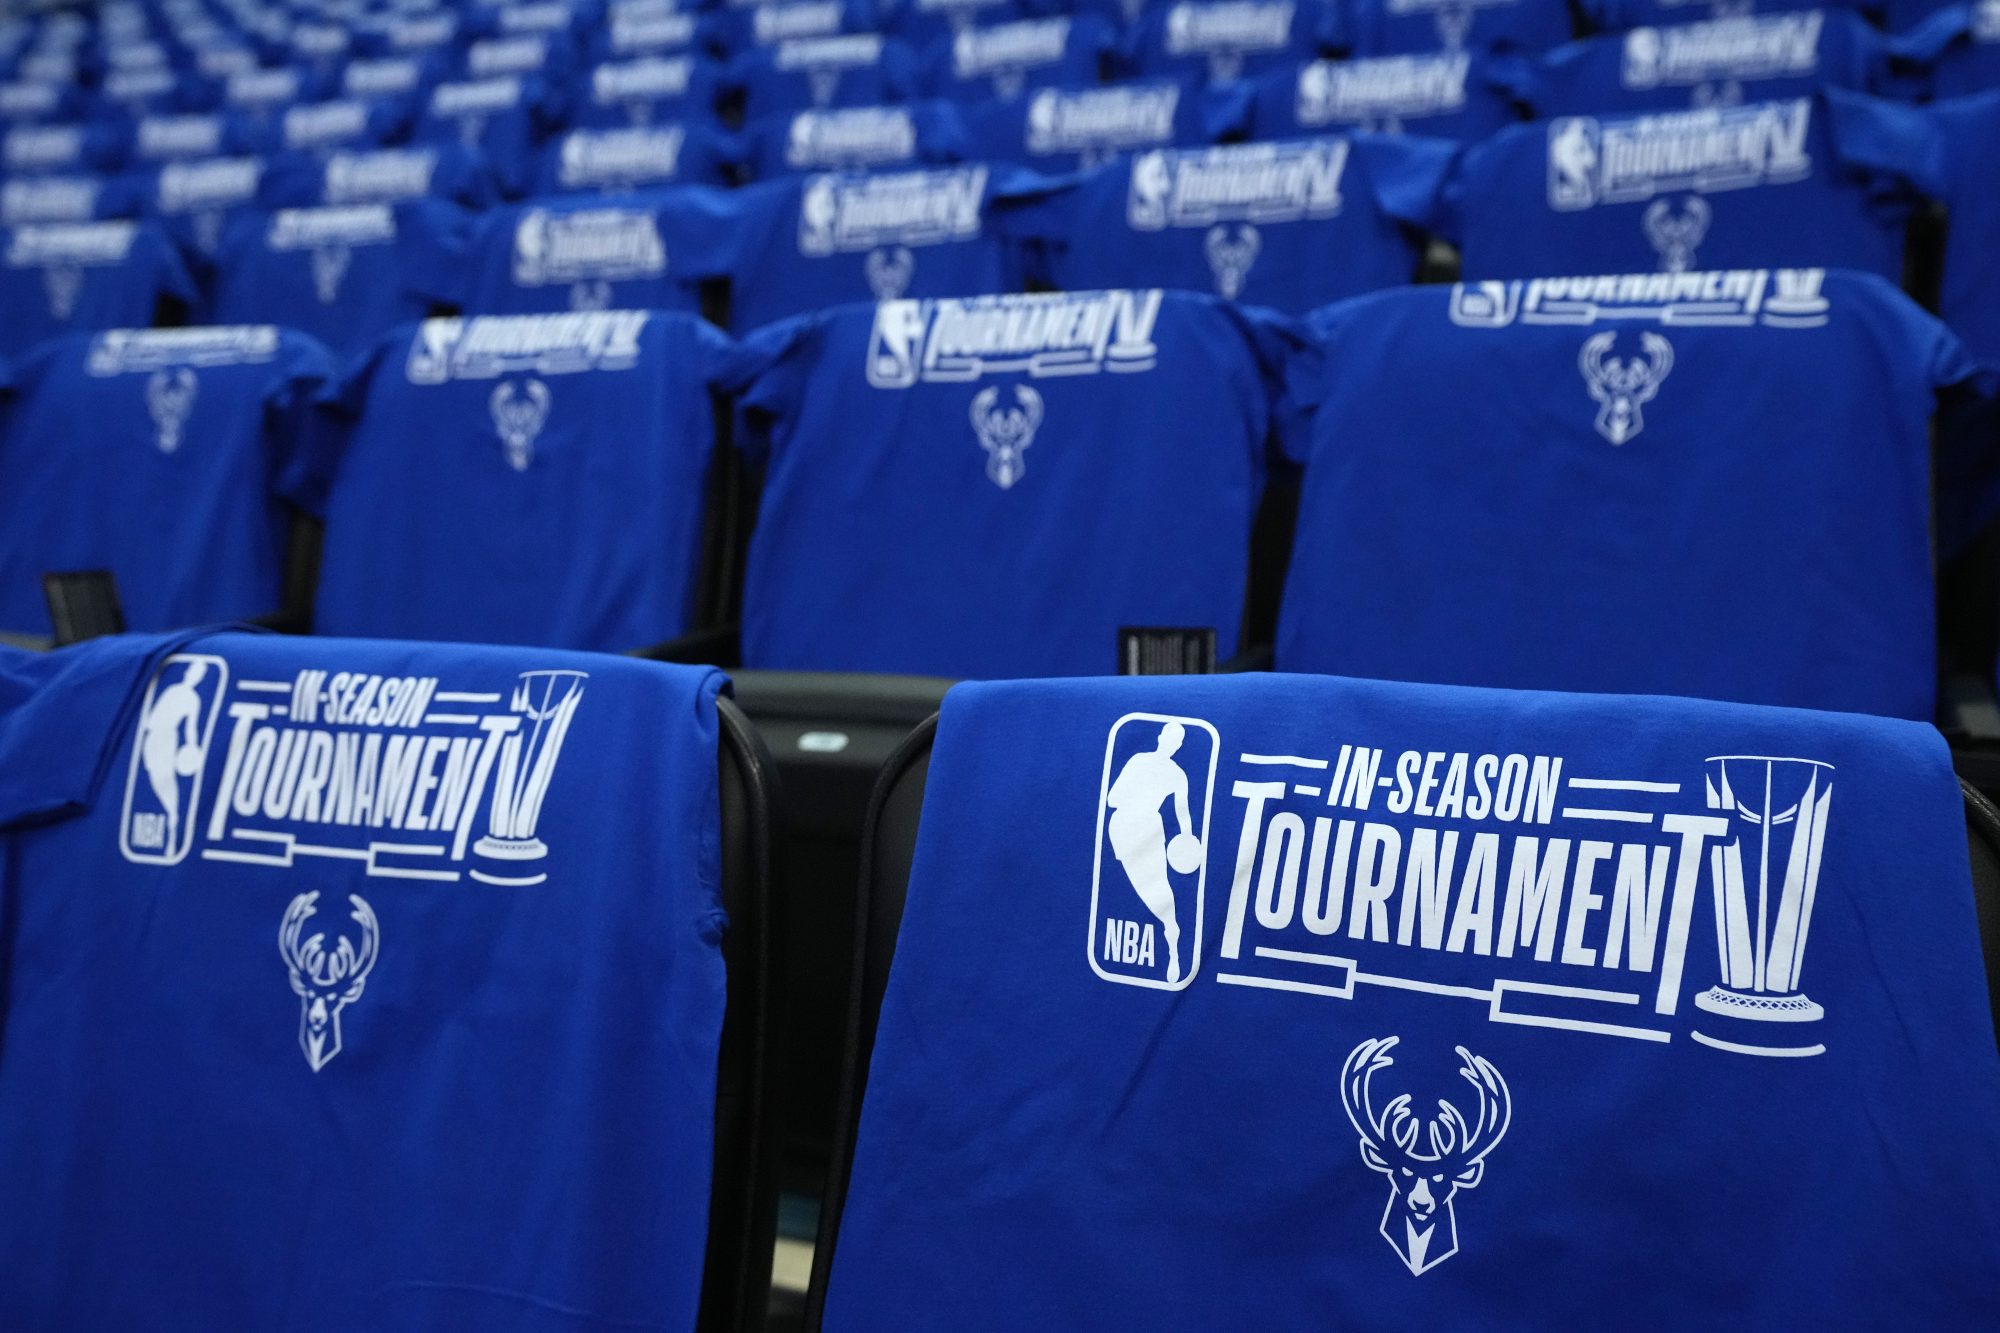 A general view of ee shirts with the NBA In Season Tournament logo prior to the game between the New York Knicks and Milwaukee Bucks e1702588262711 oQXfD4 sports